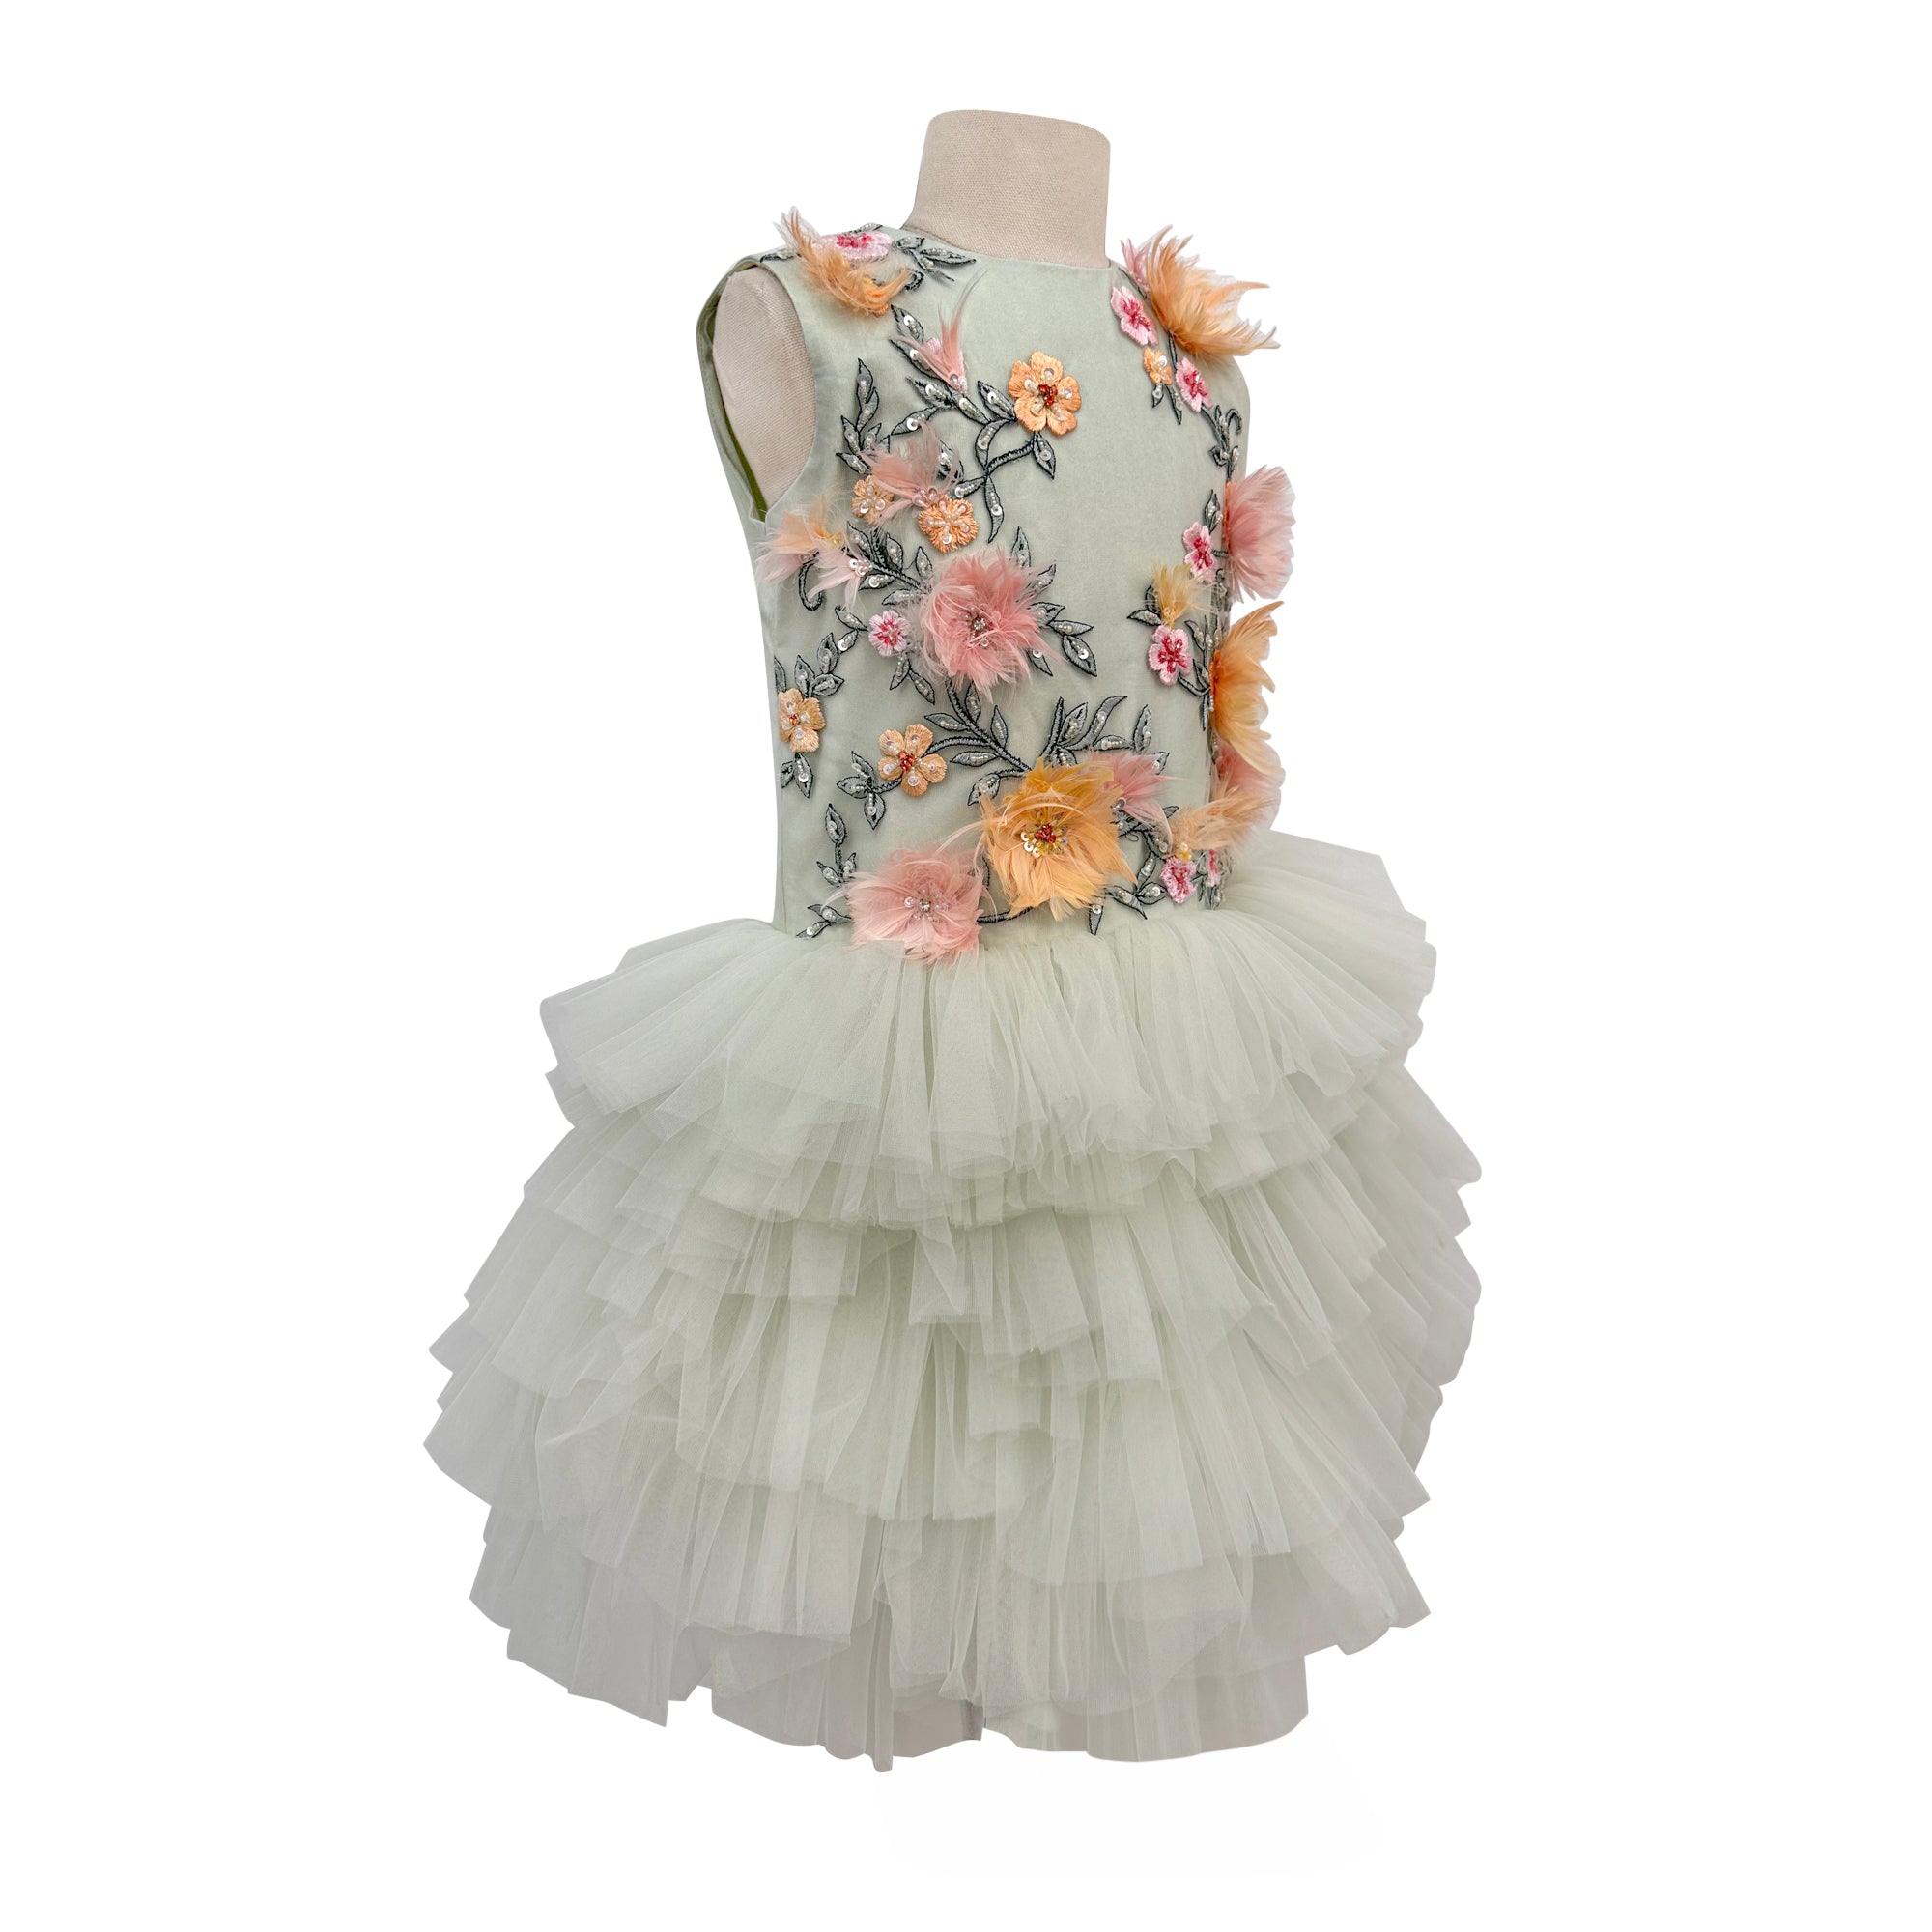 The Enchanted Forest Dress